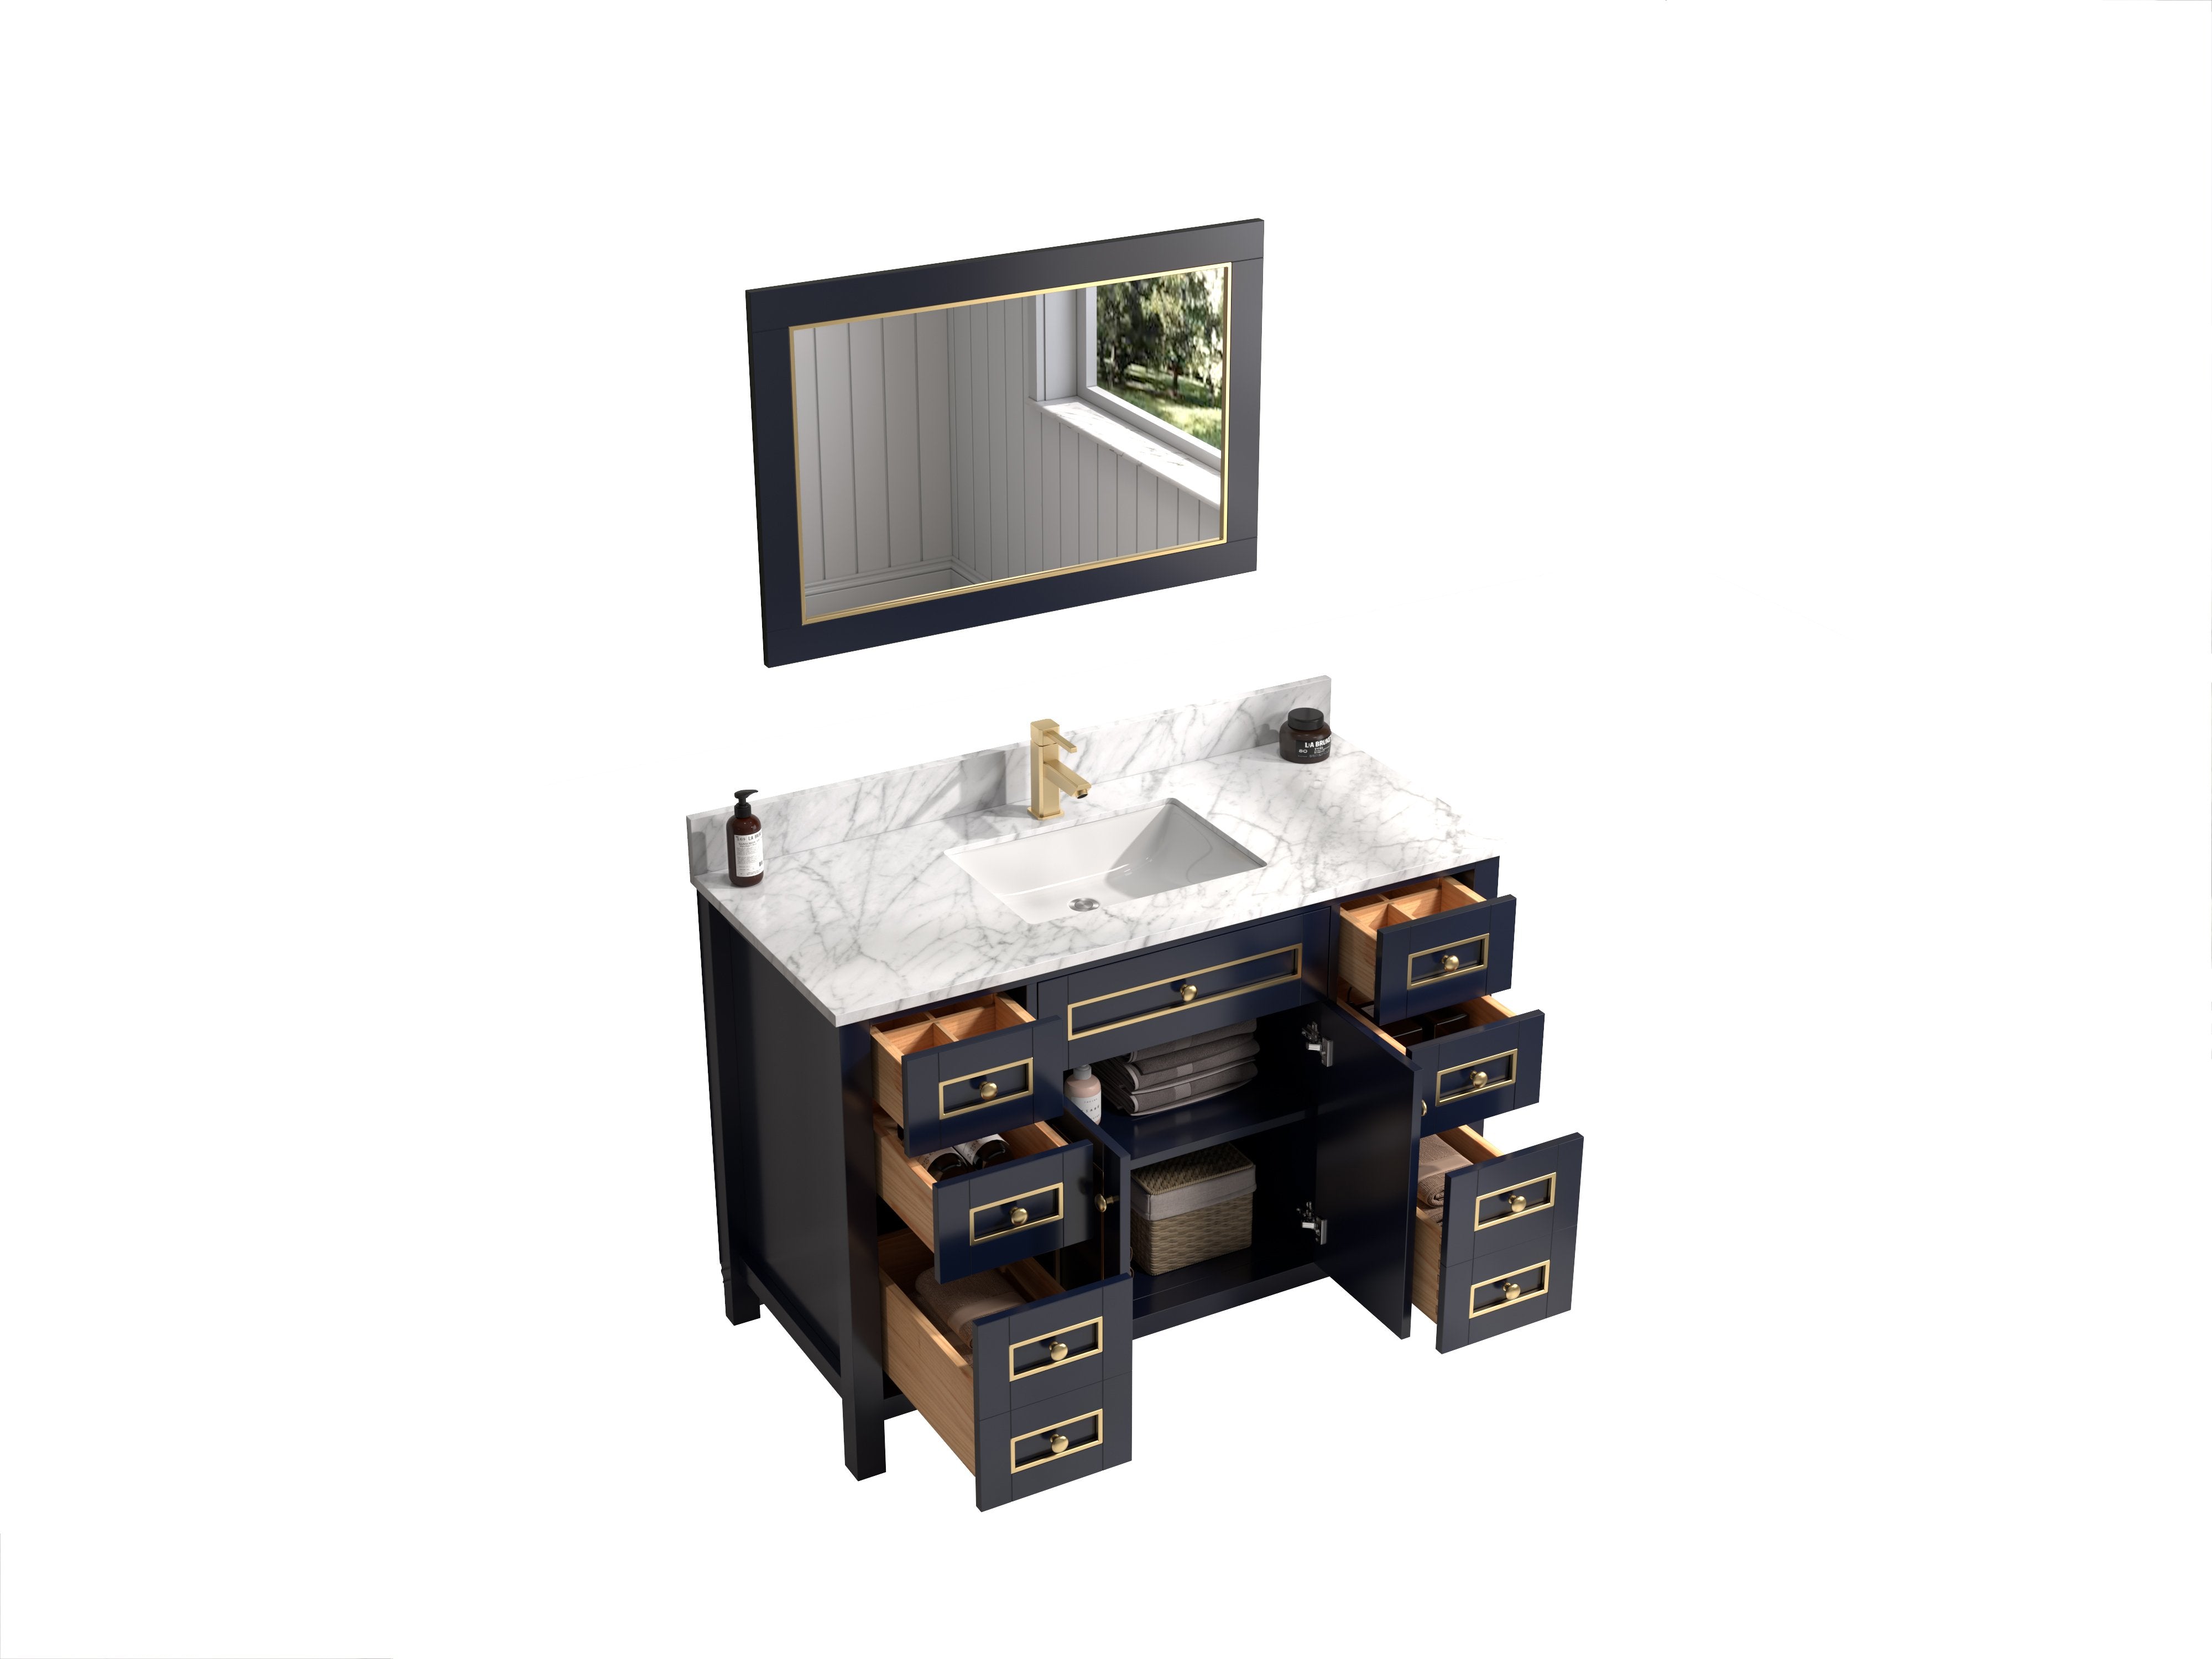 48" Sink Vanity Cabinet With Carrera White Top